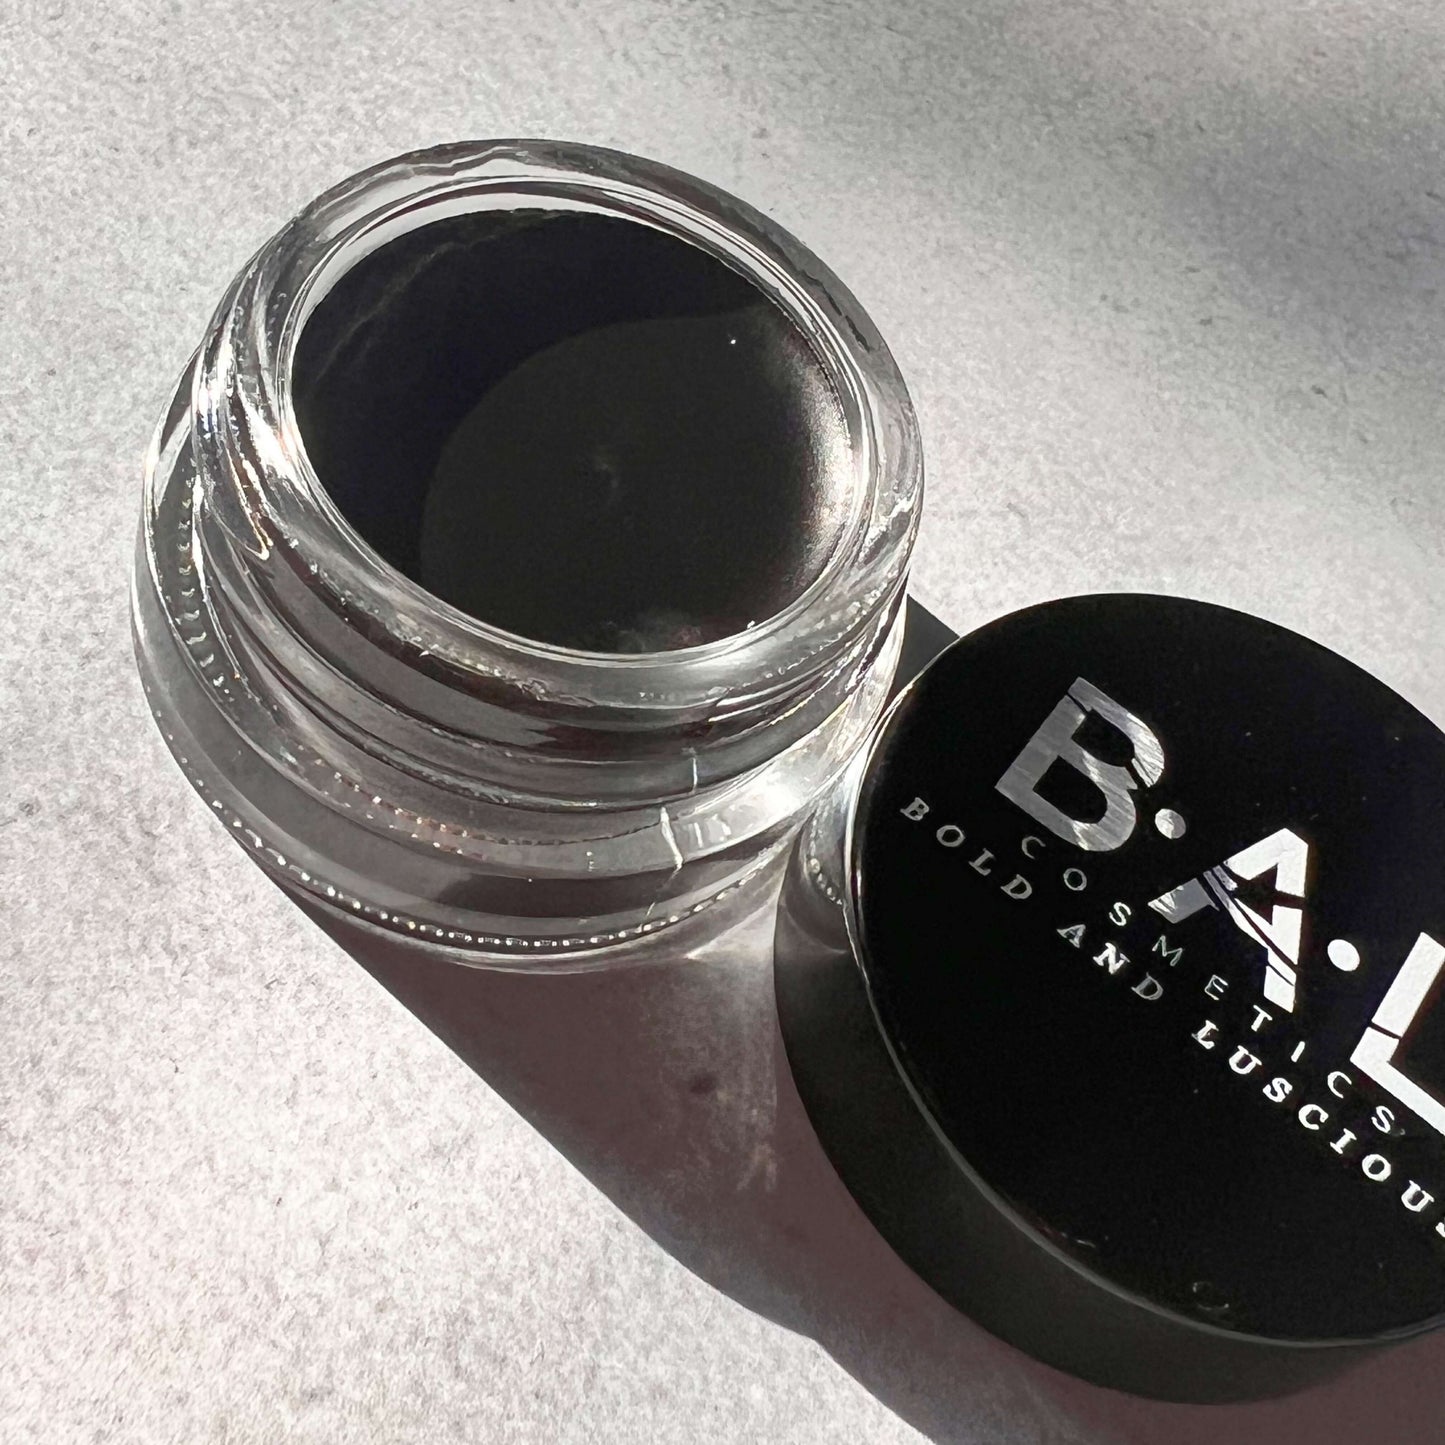 Black Gel Eyeliner in a small  glass pot. the Logo for Bold and Luscious Cosmetics is visible on the lid. The texture is soft and creamy.